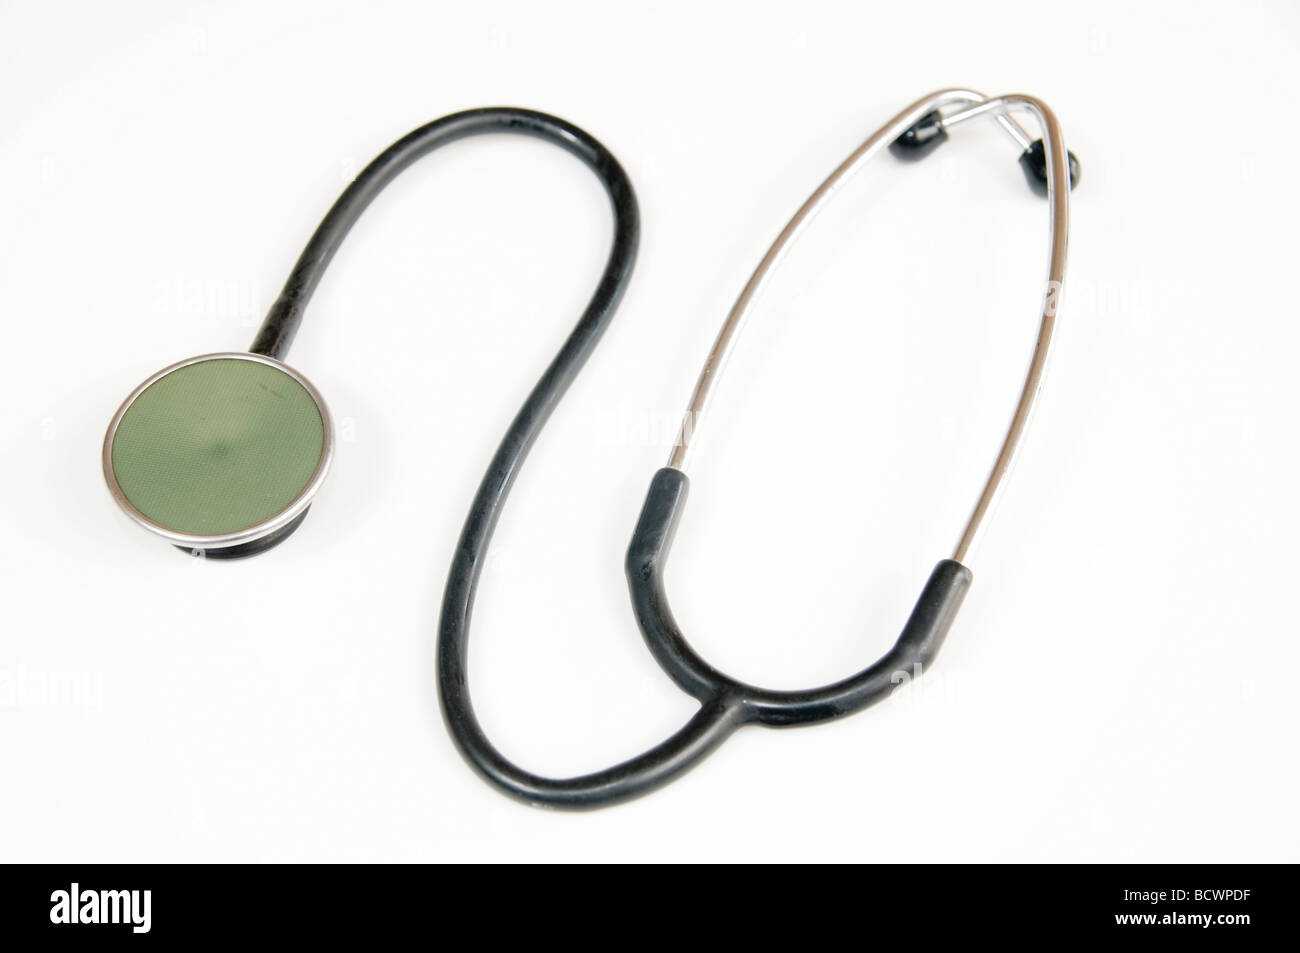 Cutout of a stethoscope on white background Stock Photo